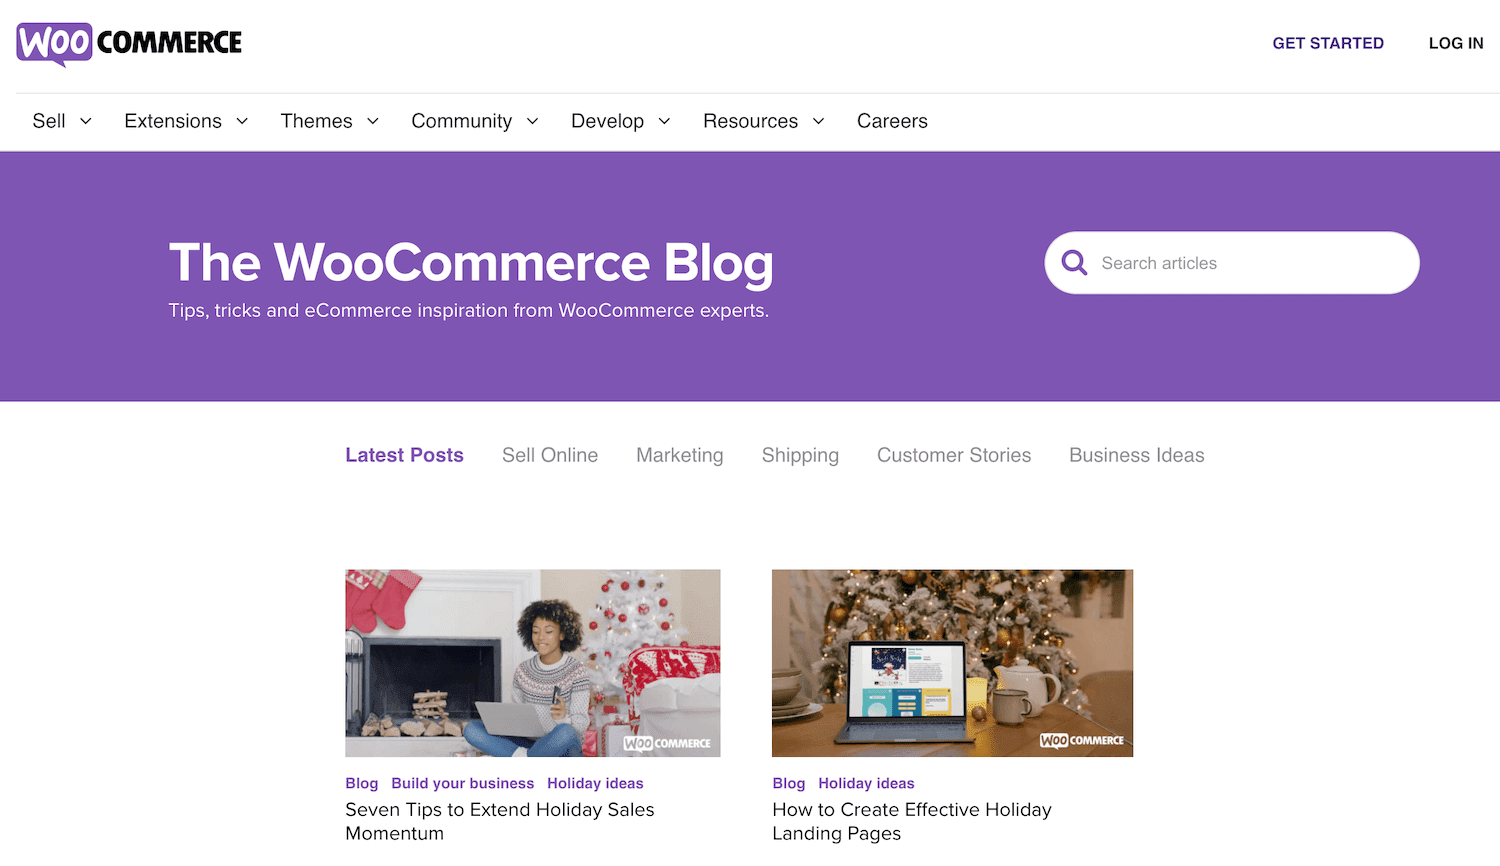 The official WooCommerce blog.